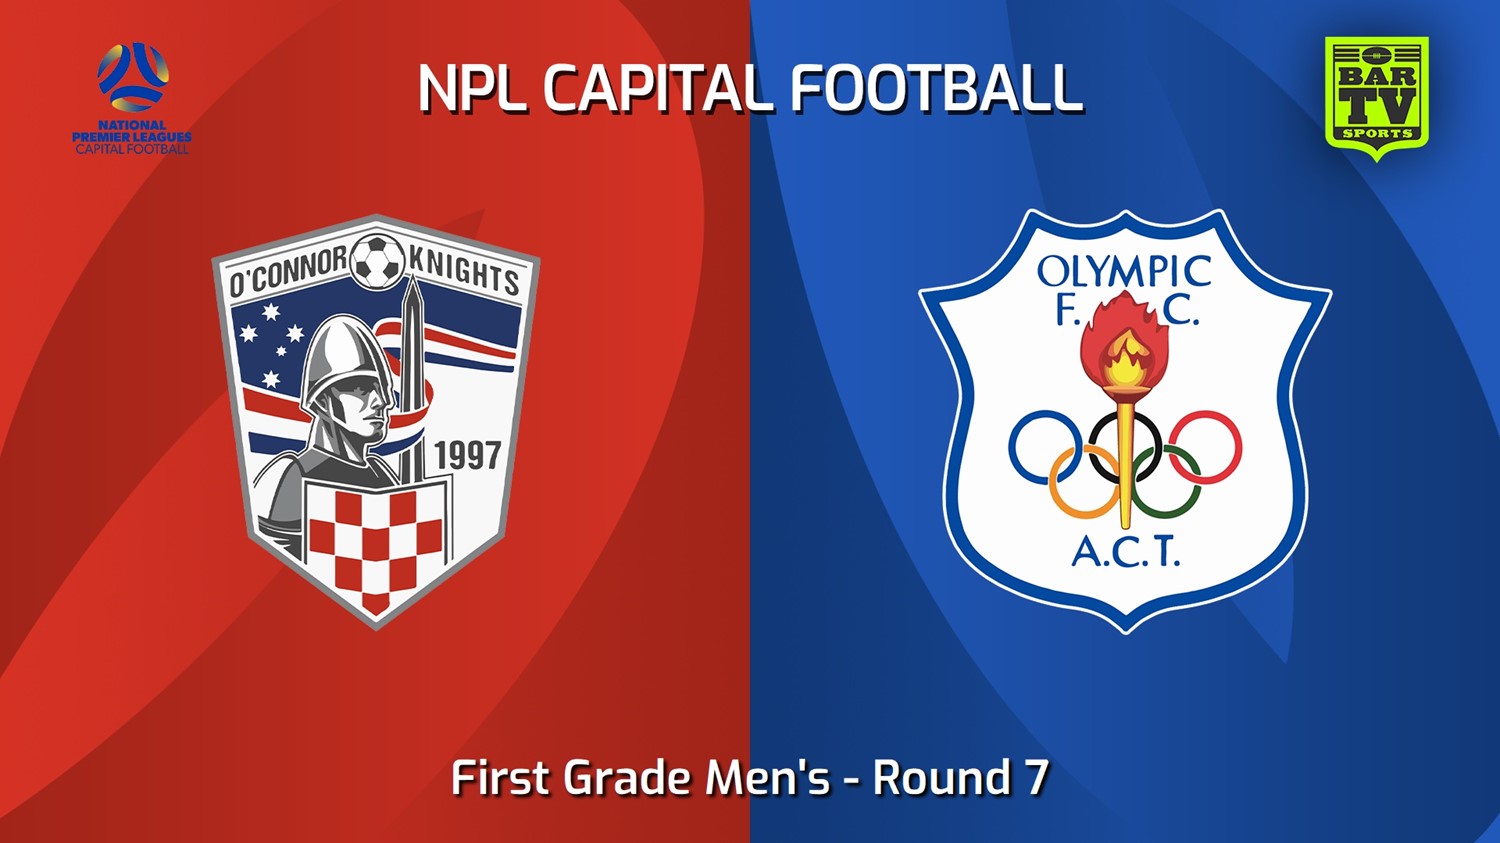 240518-video-Capital NPL Round 7 - O'Connor Knights SC v Canberra Olympic FC Minigame Slate Image